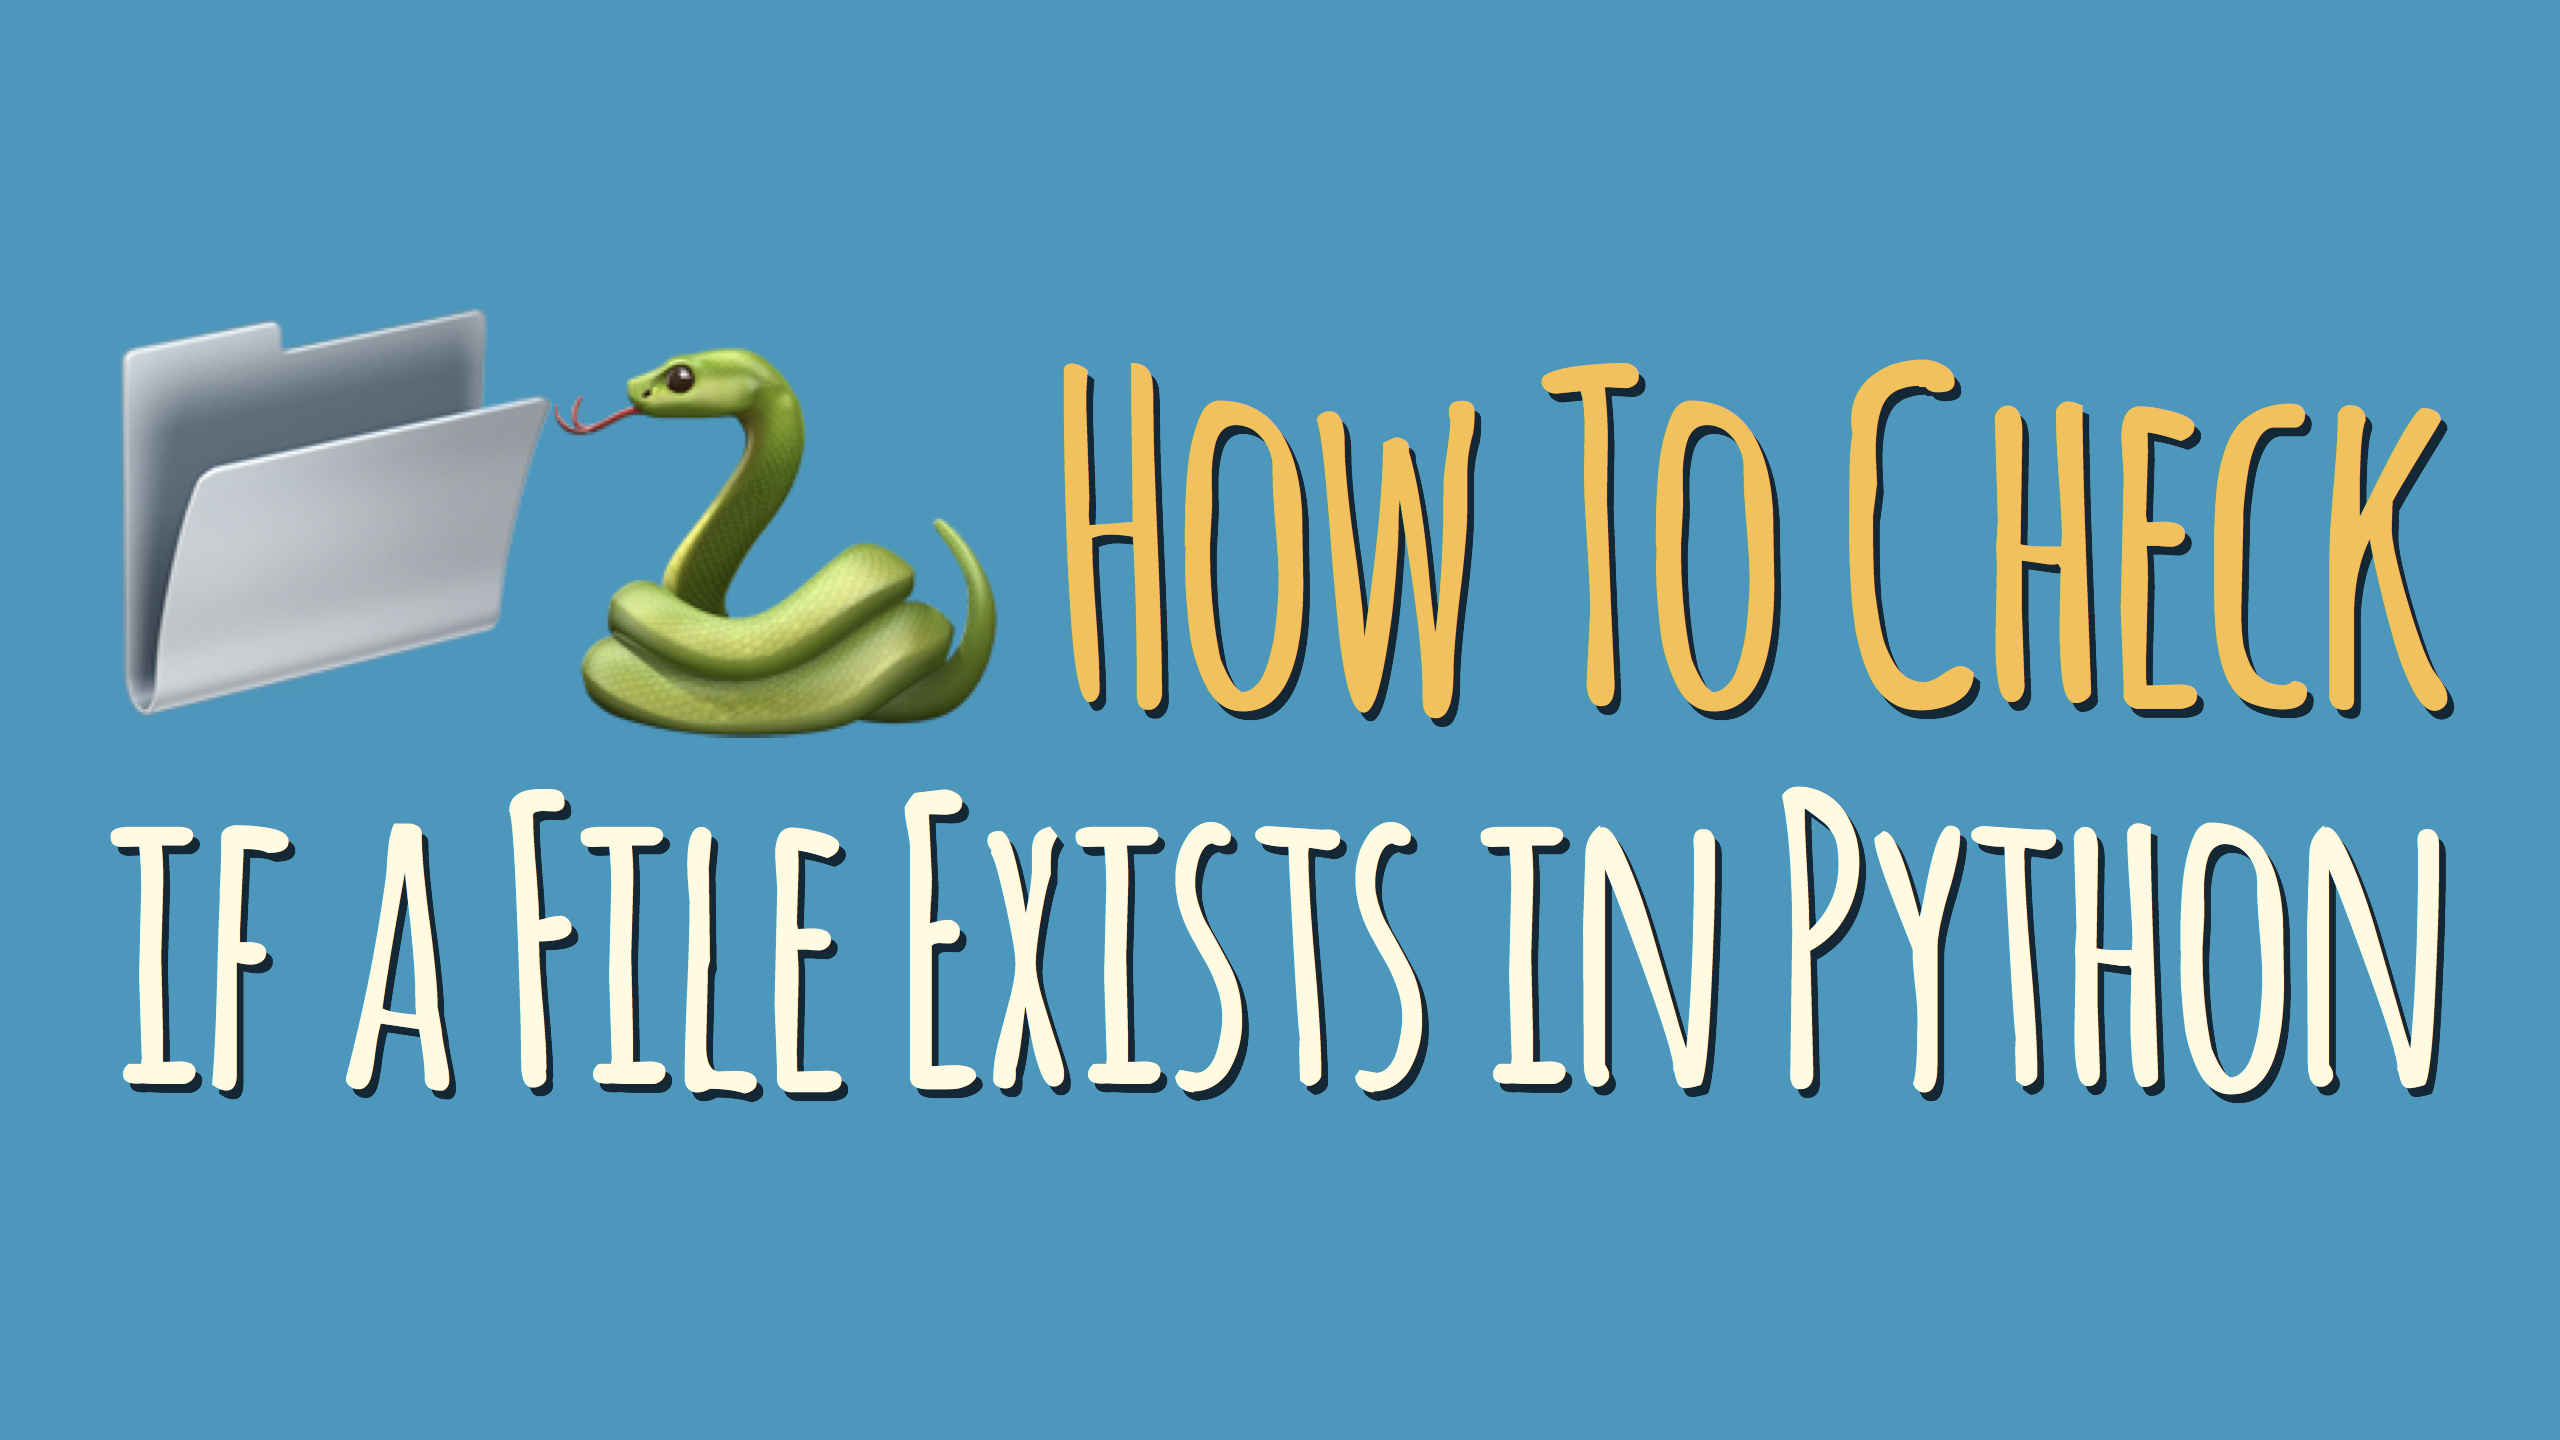 How to Check if a File Exists in Python